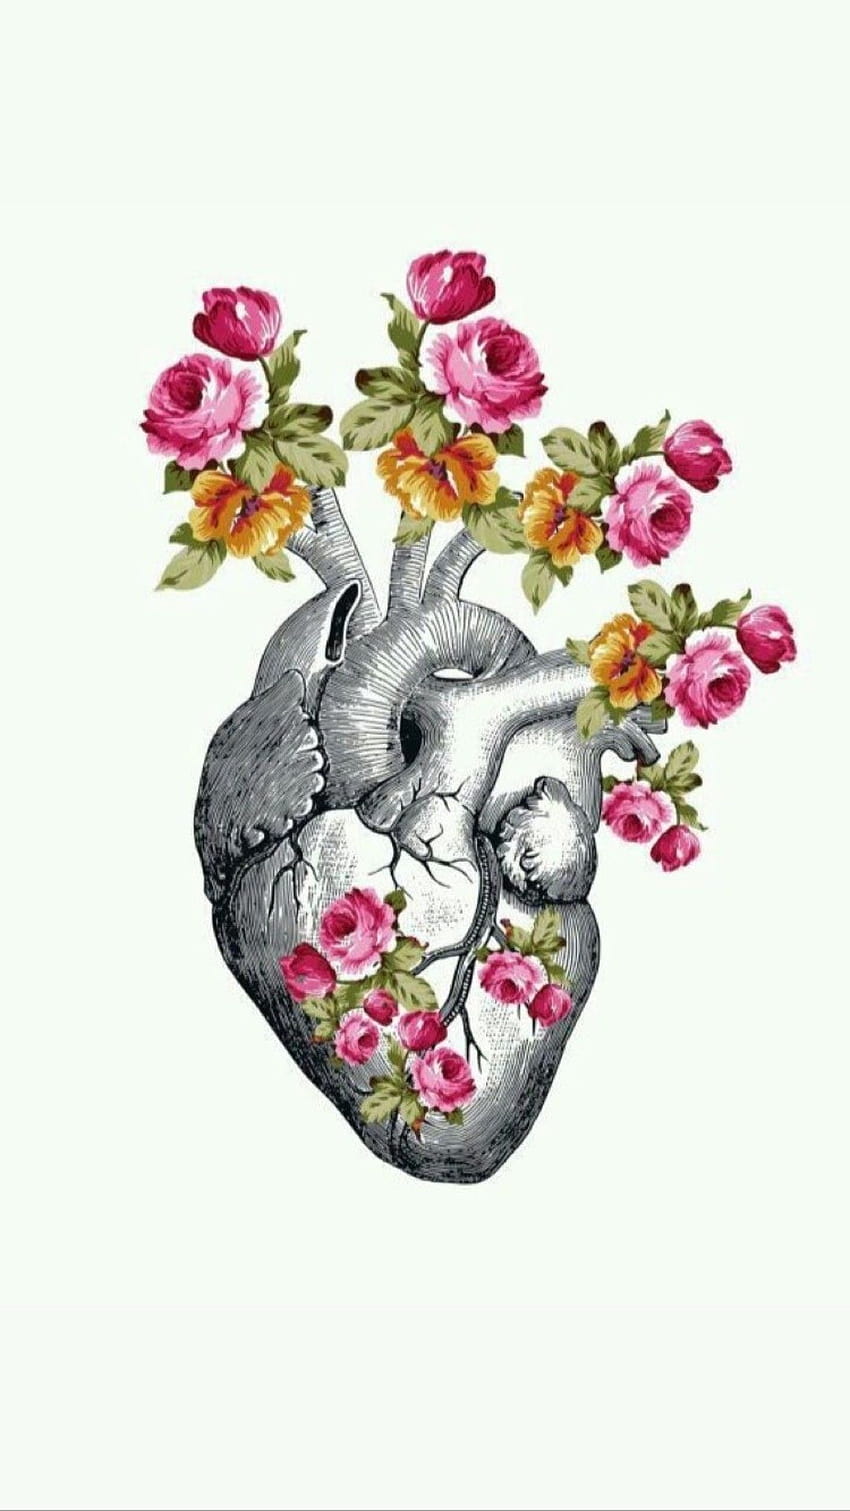 Aesthetic Health posted by Zoey Johnson, medical heart HD phone wallpaper